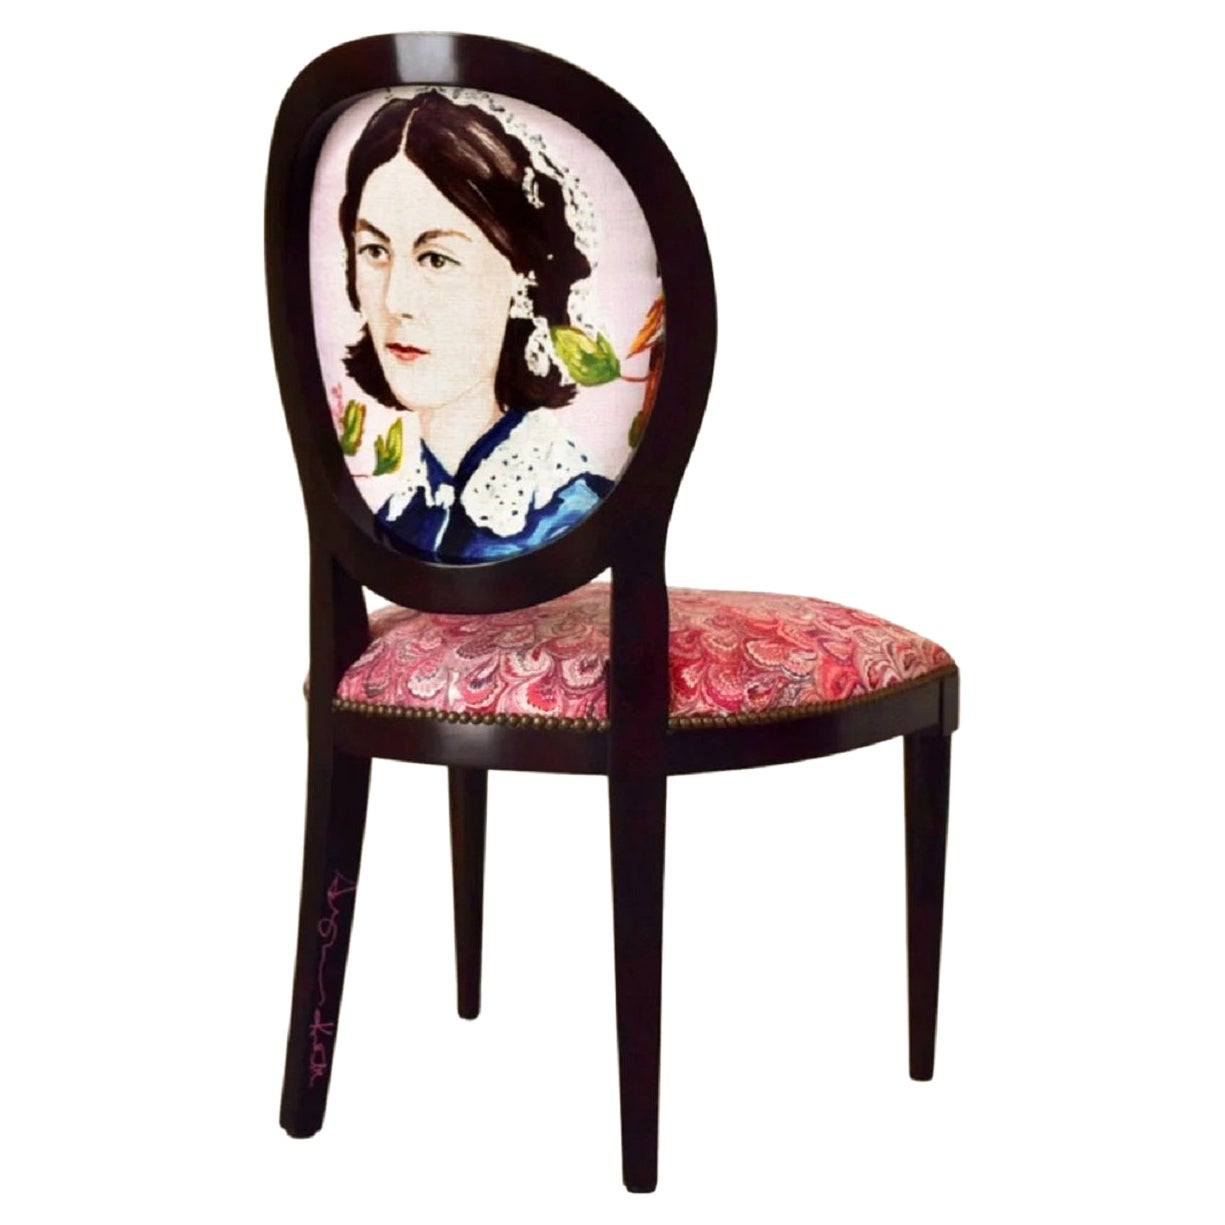 "Florence Nightingale" Dining Chair by Ashley Longshore x Ken Fulk, 2021